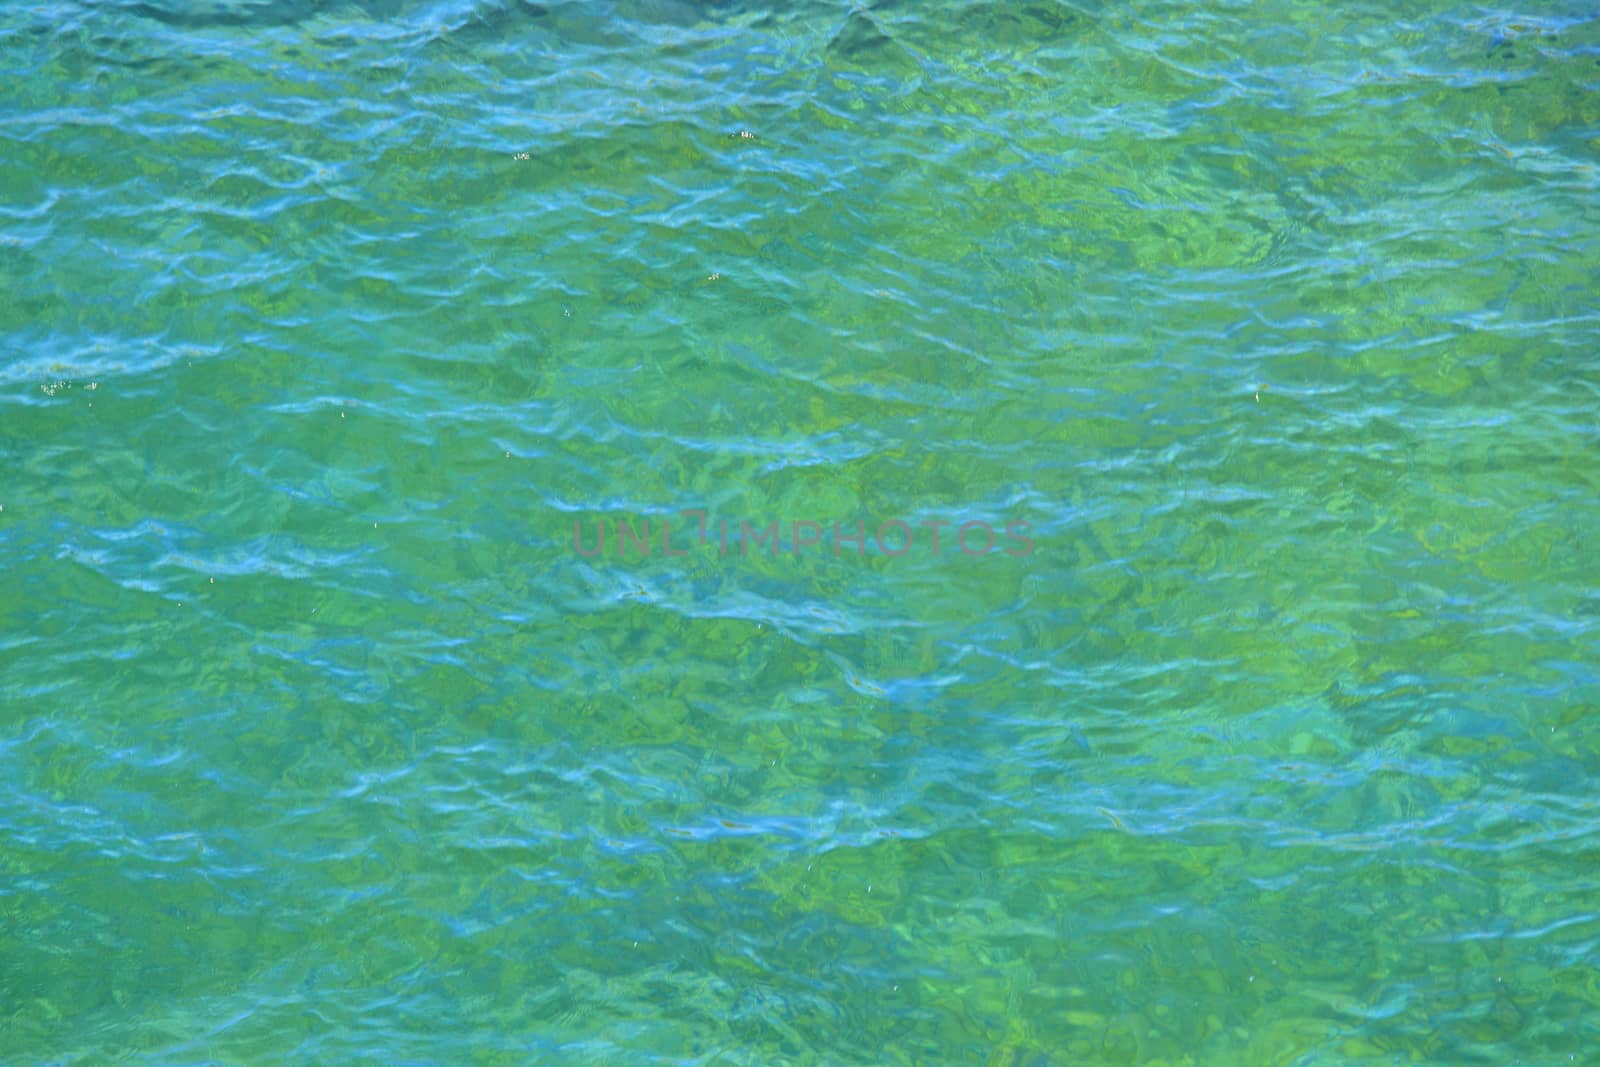 Water surface with small waves 